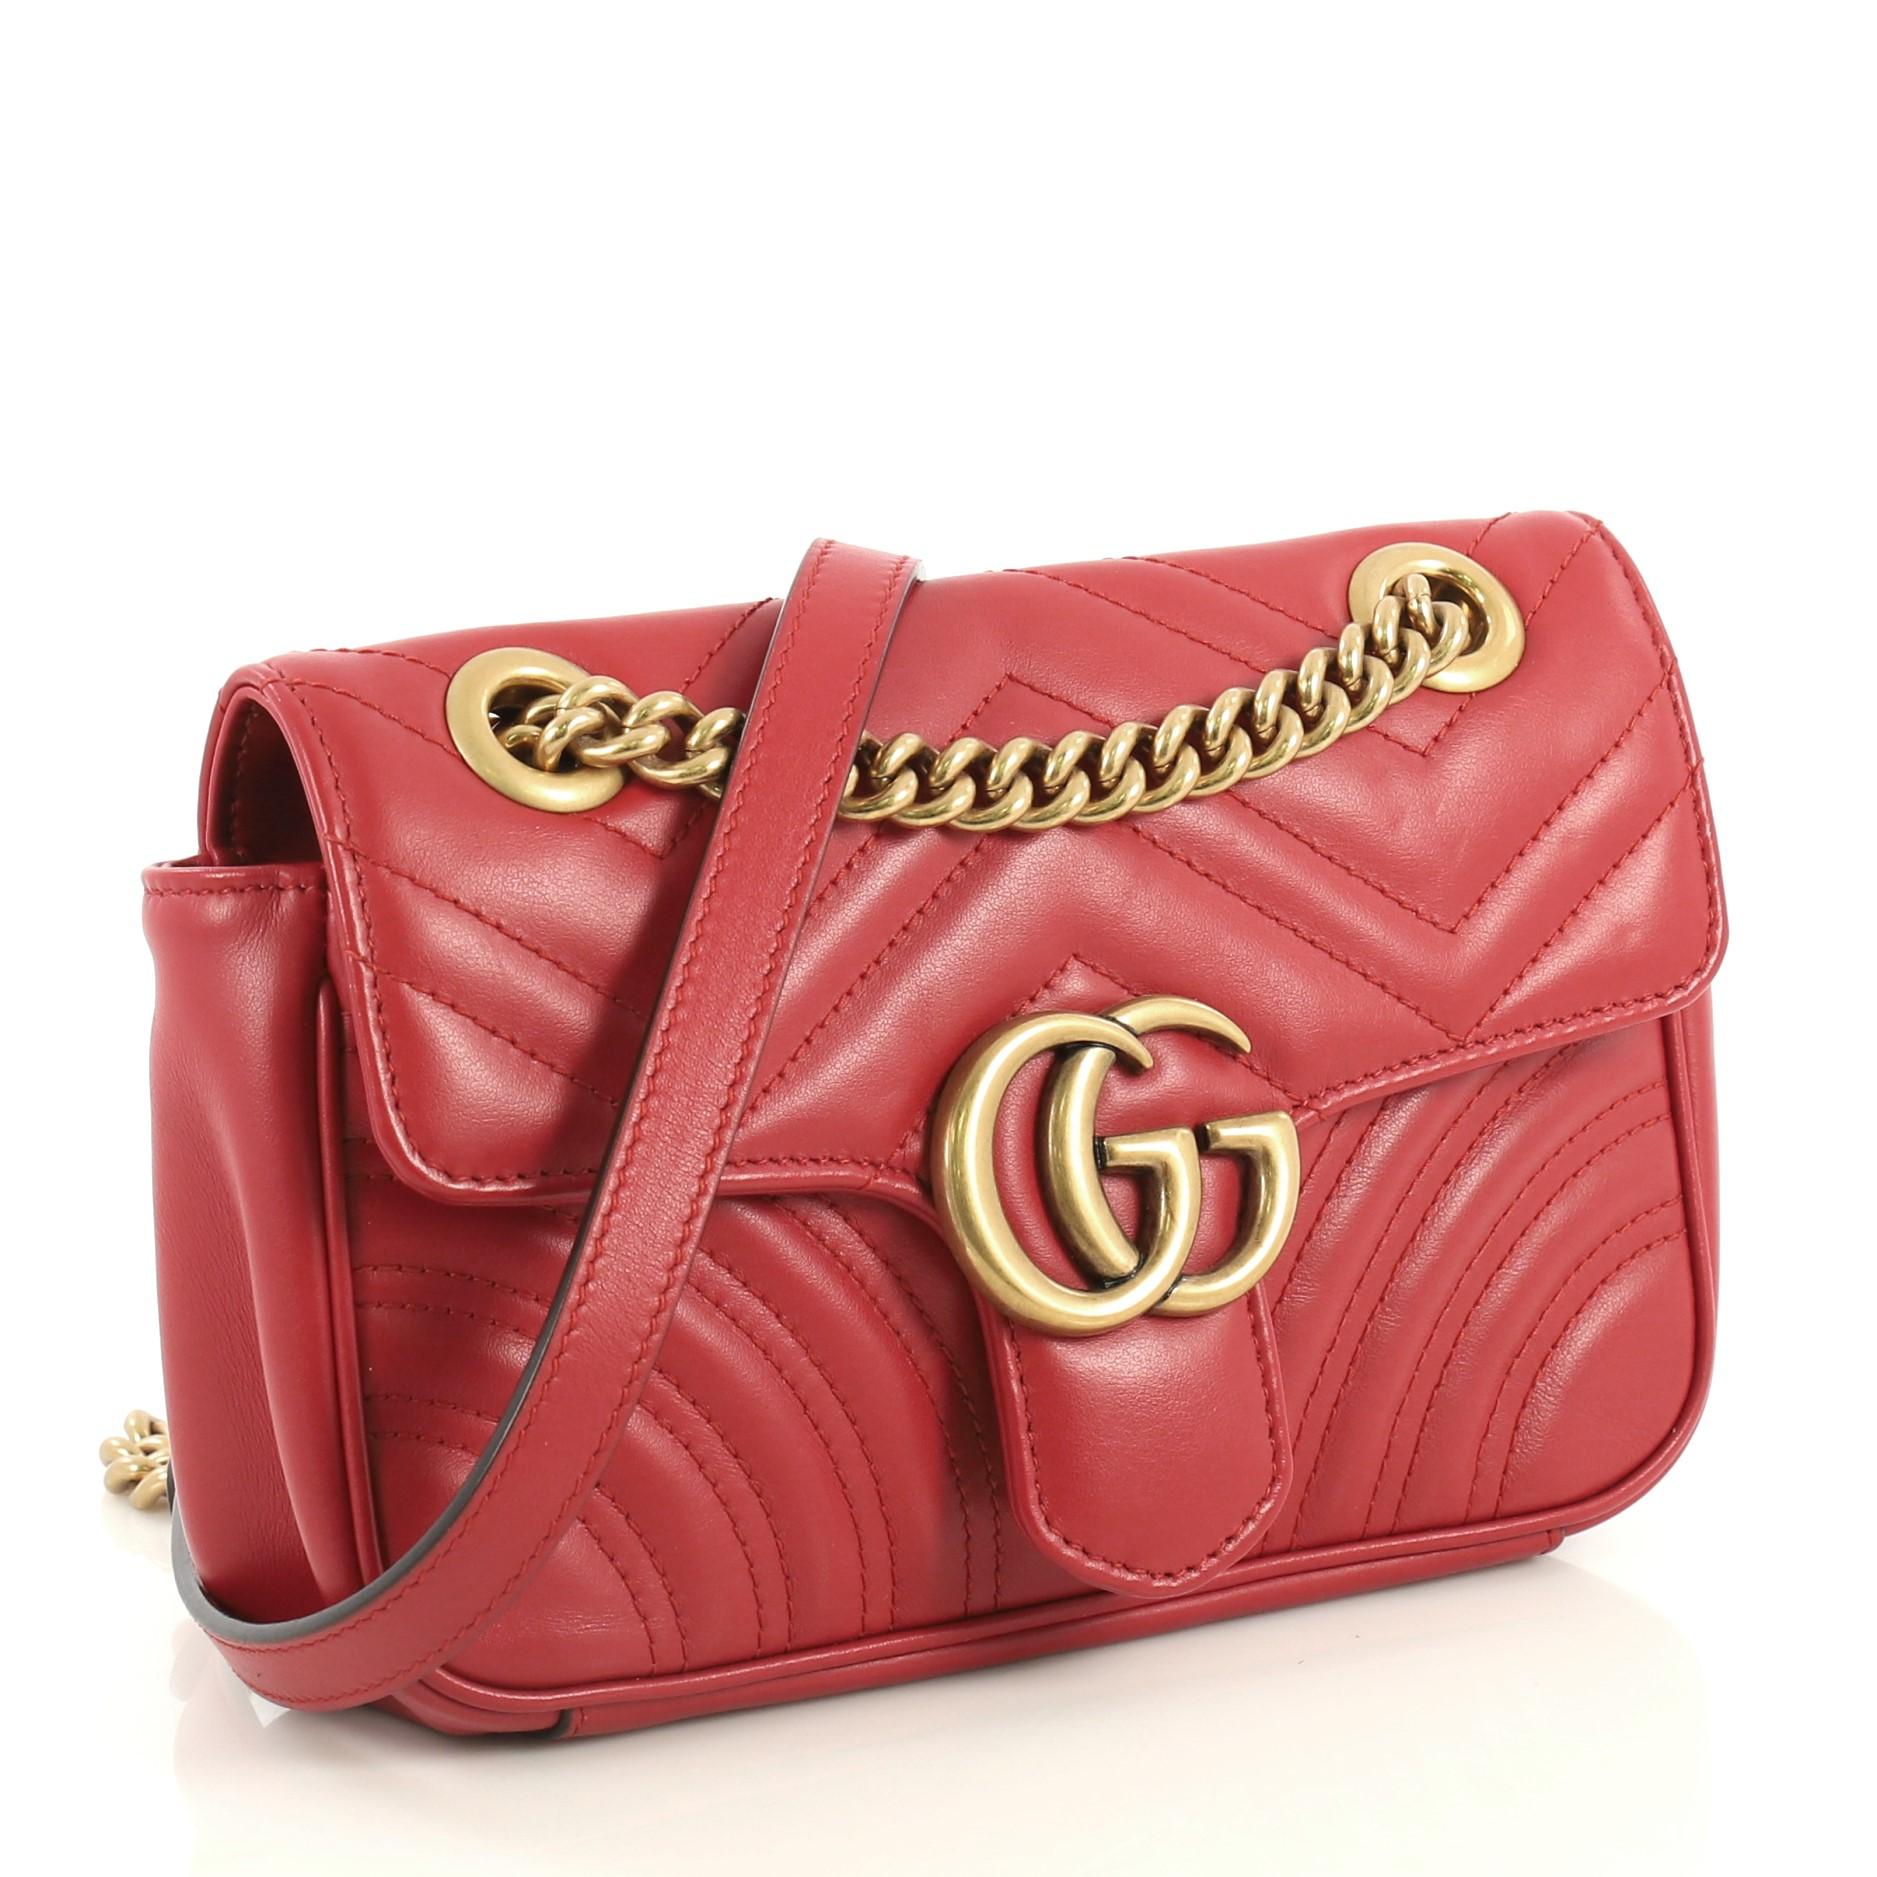 This Gucci GG Marmont Flap Bag Matelasse Leather Mini, crafted from red matelasse leather, features a chain link strap with leather pad, flap top with GG logo, and aged gold-tone hardware. Its push-lock closure opens to a neutral microfiber interior